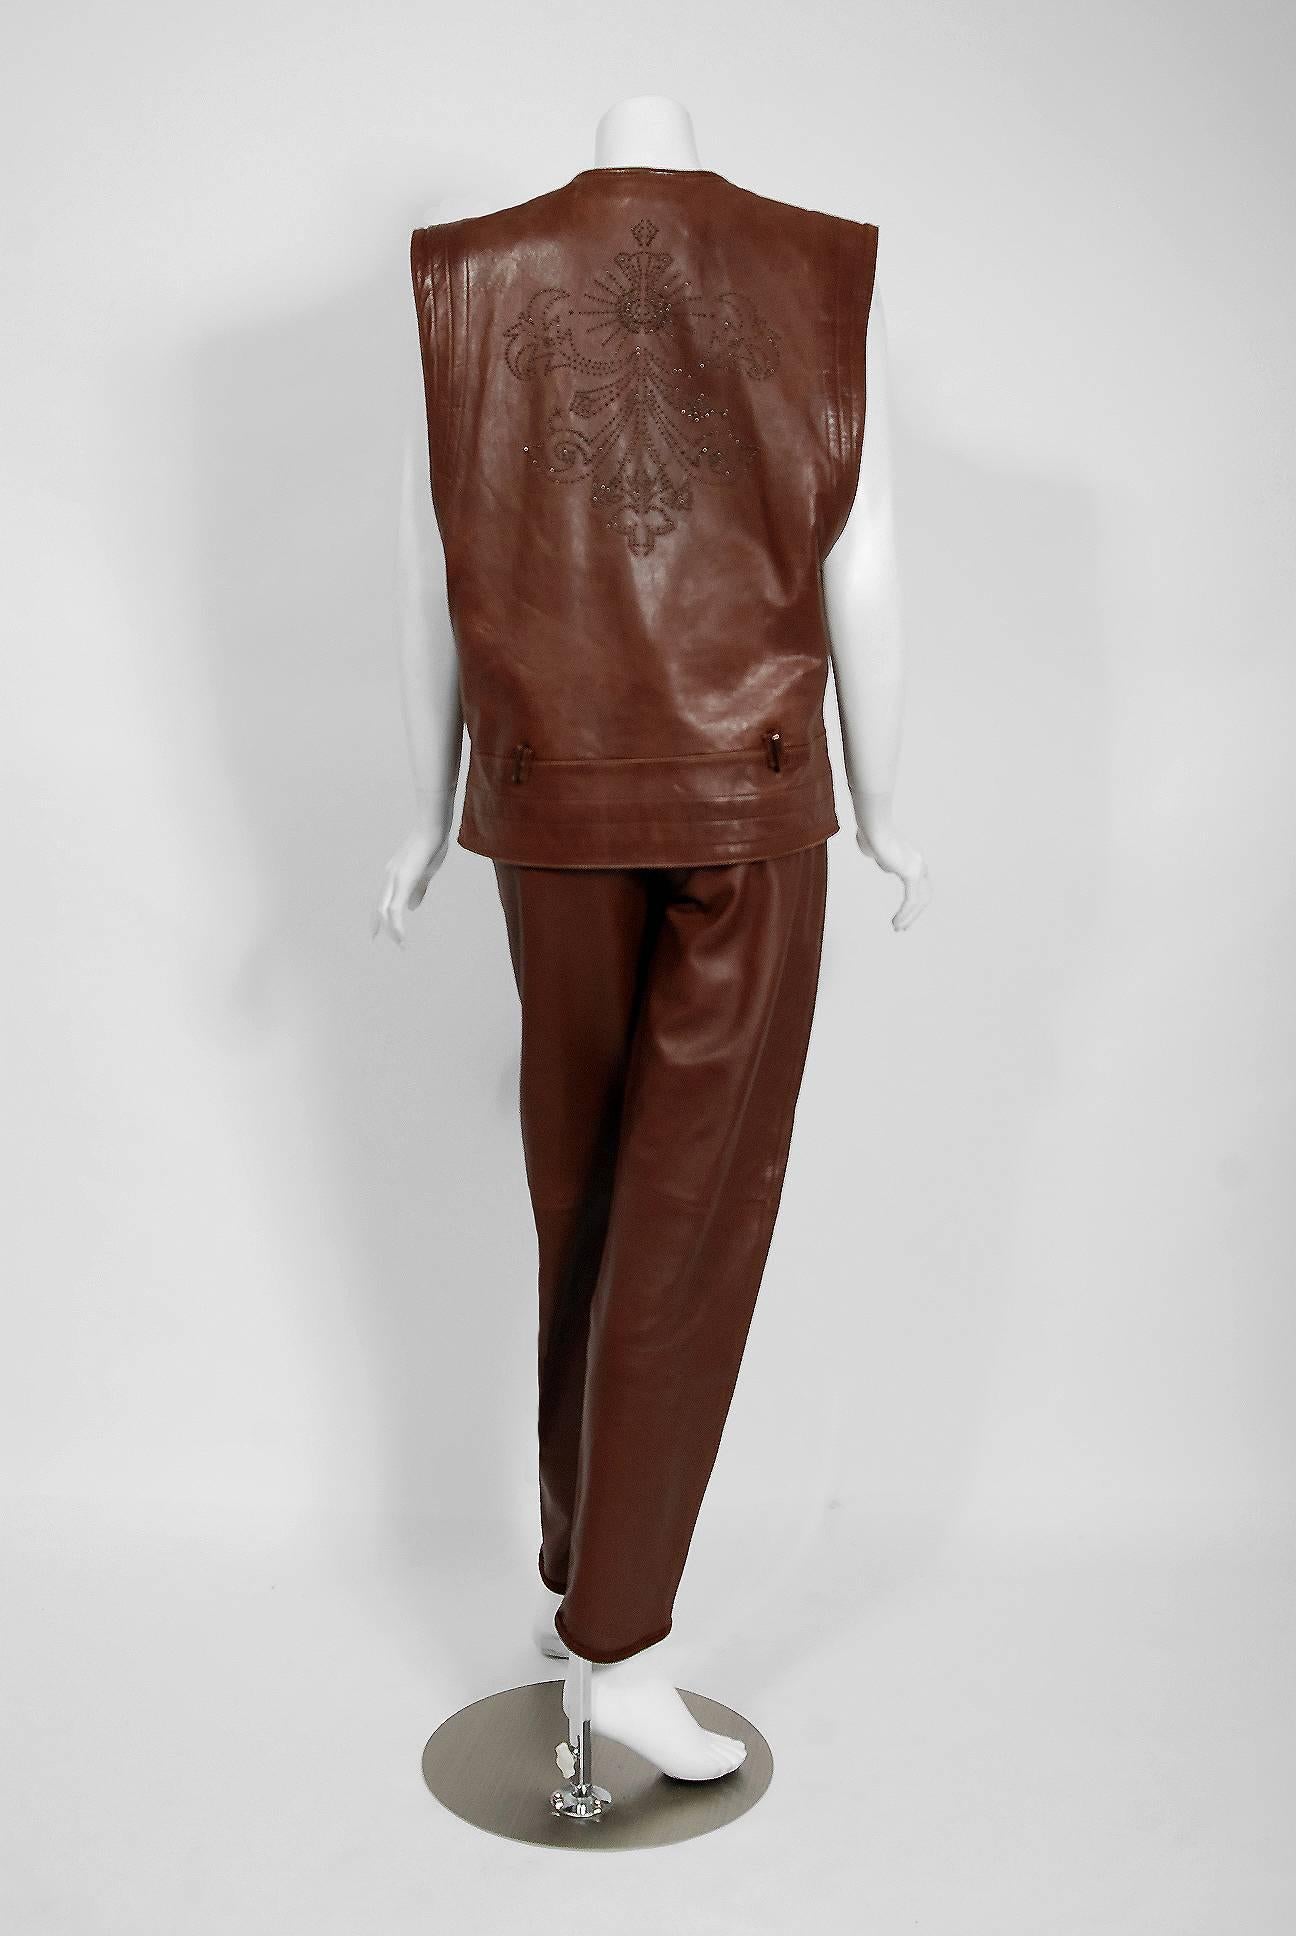 1984 Gianni Versace Couture Studded Brown Leather Vest and High Waist Pants 2